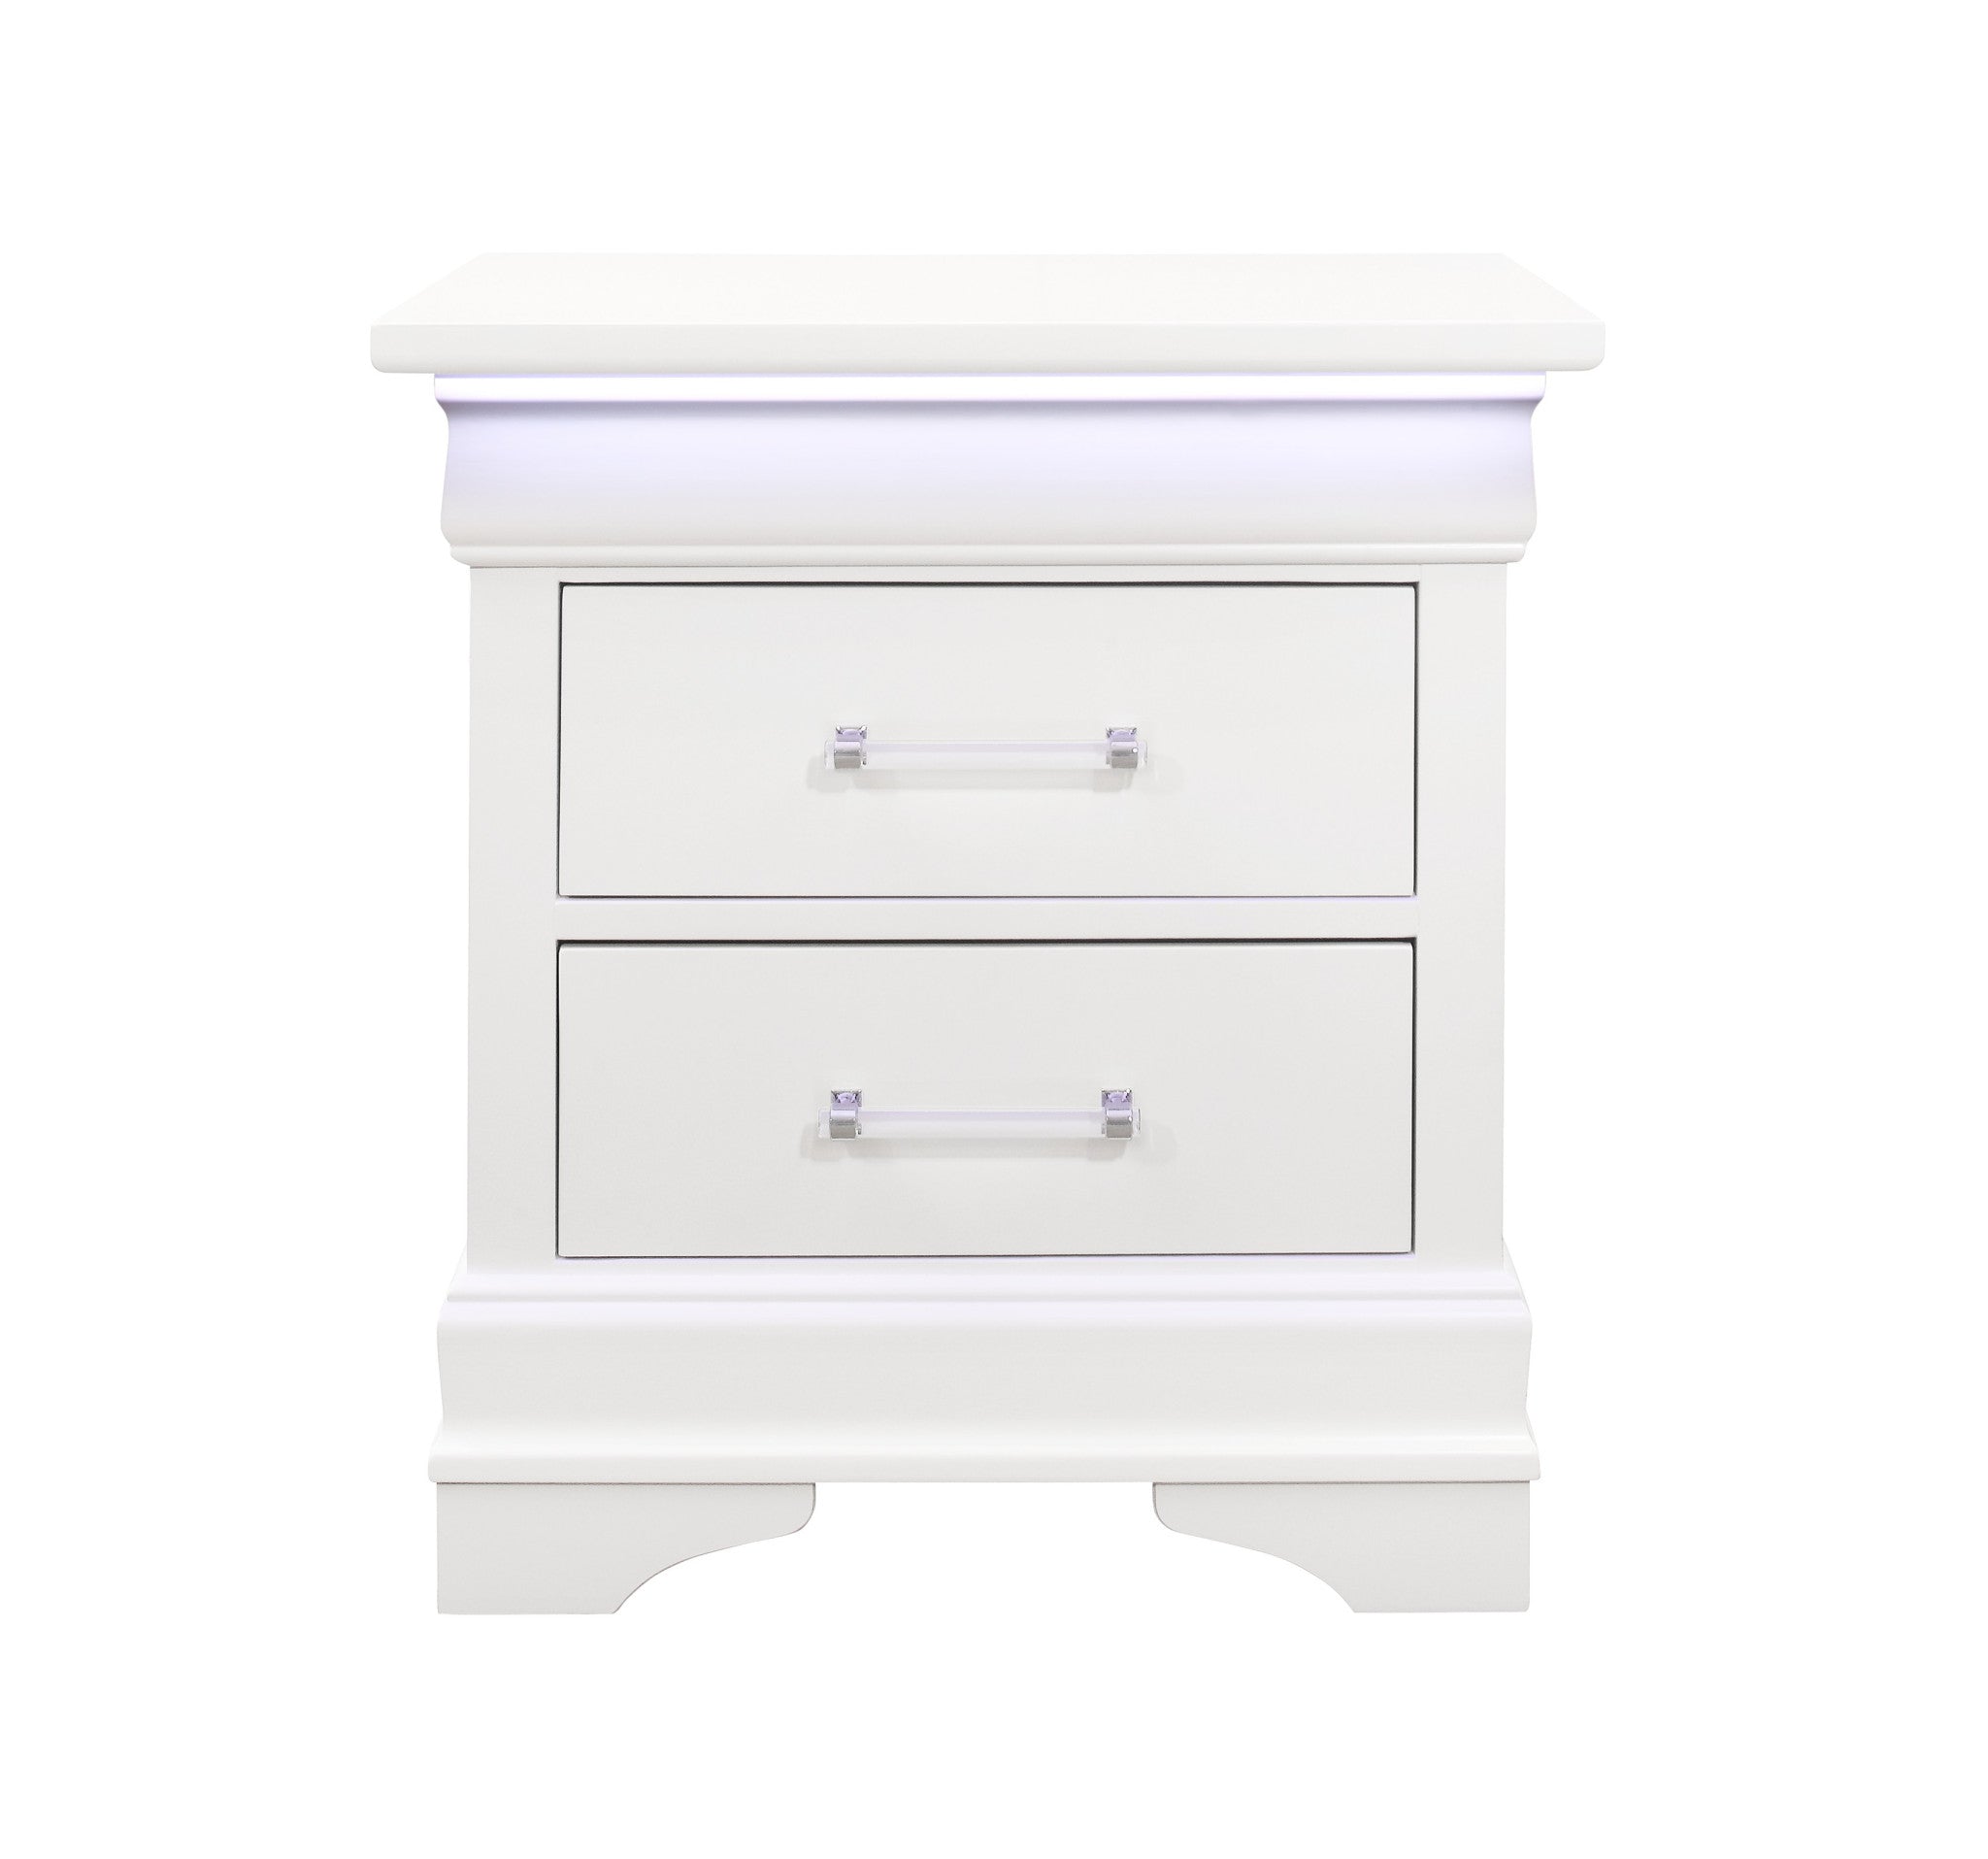 24" White Two Drawer Nightstand